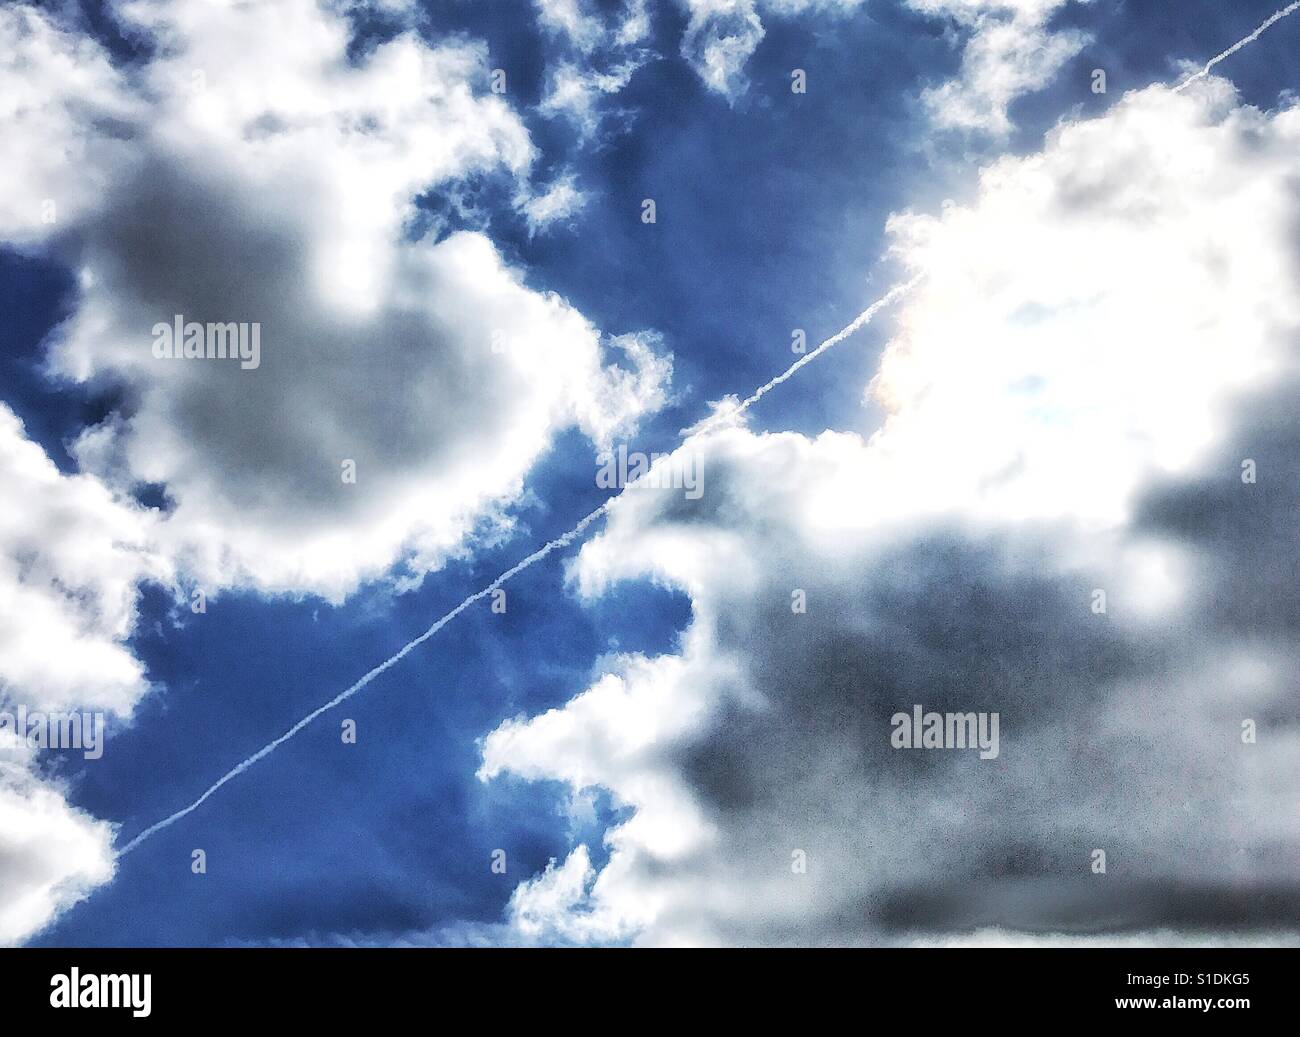 Jet Stream , the trail of a jet aircraft diagonally crossing a cloudy sky with patches of blue Stock Photo